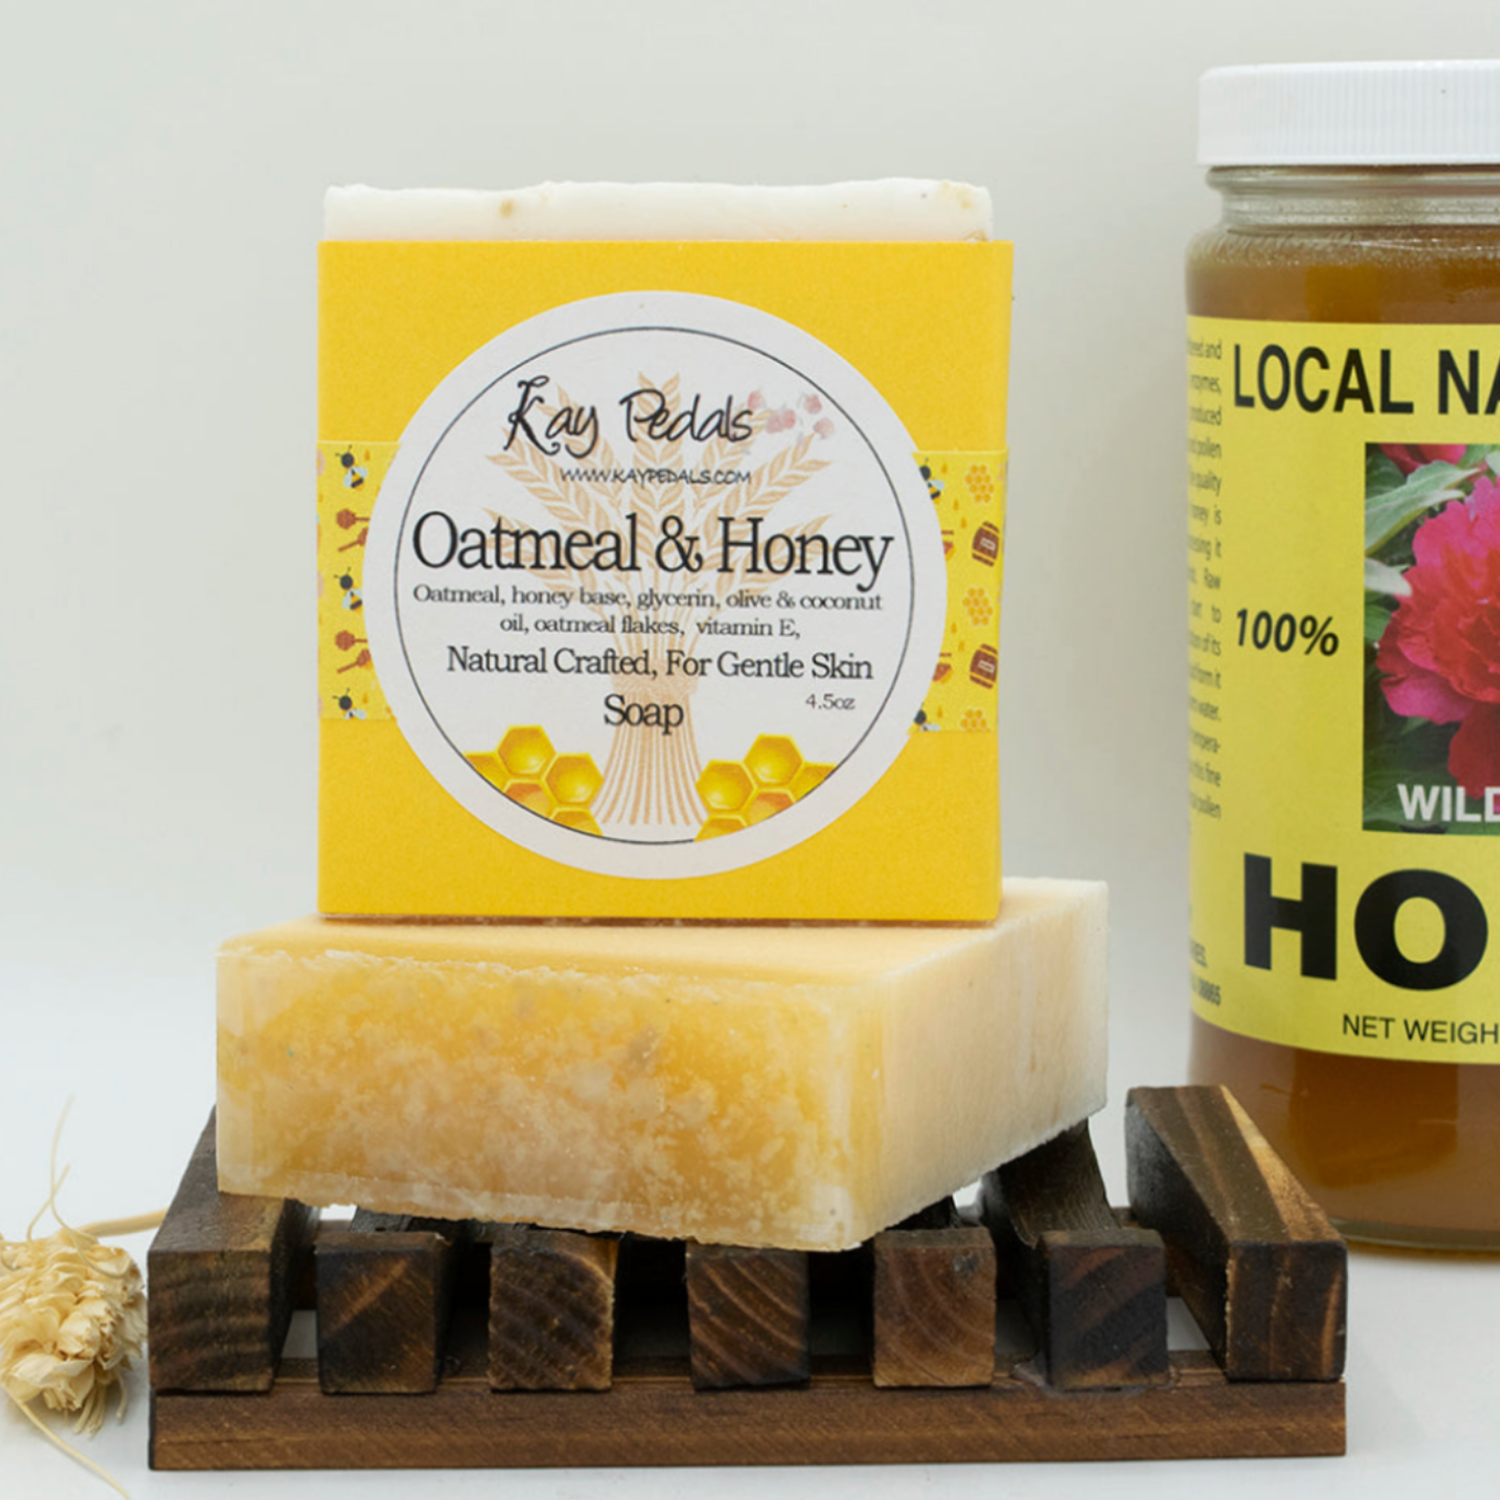 Oatmeal And Honey Natural Crafted Bar Soap 4.5oz Kay Pedals